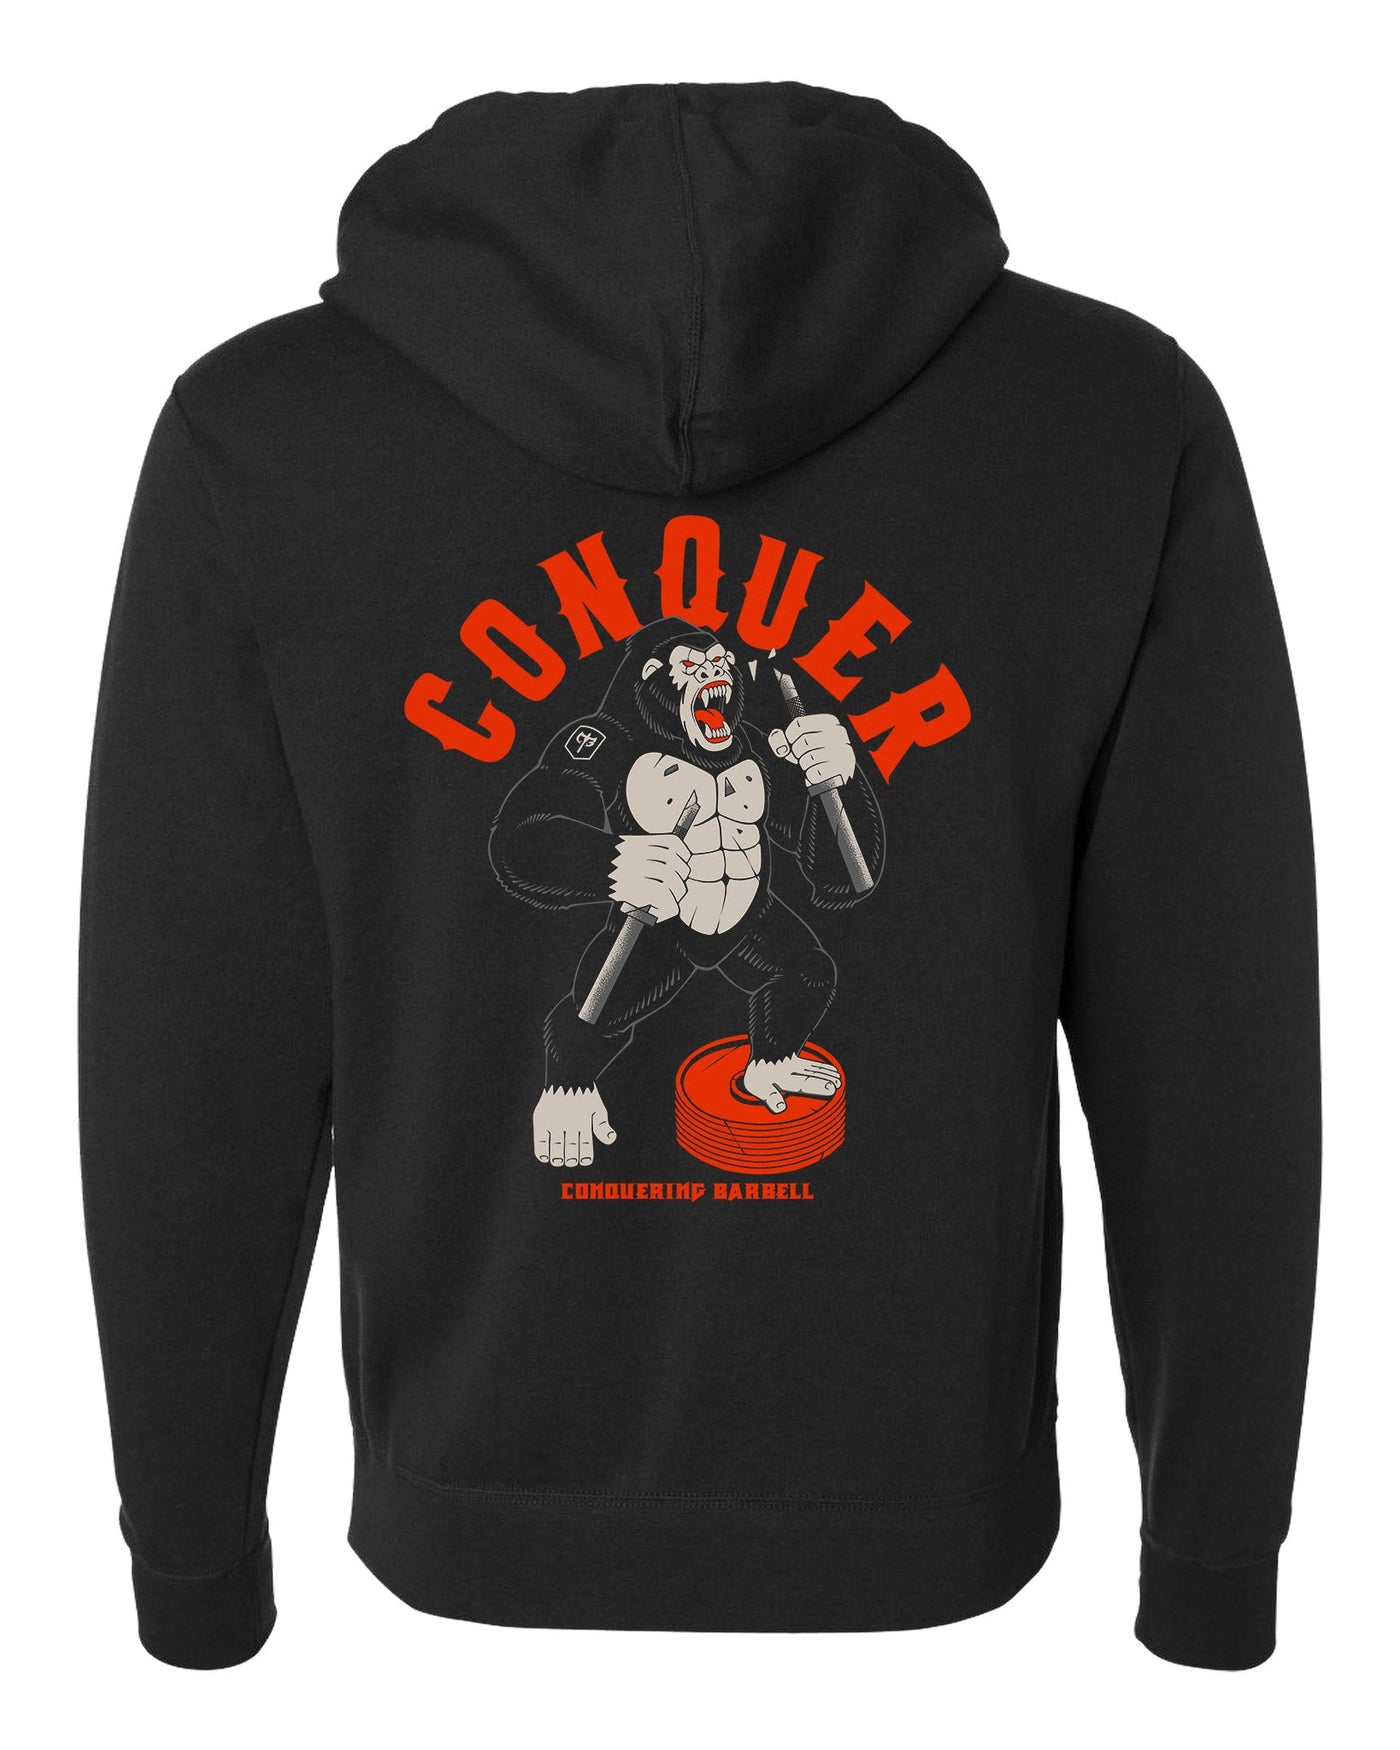 Conquer - Samurai - on Black Pullover Hoodie - Conquering Barbell